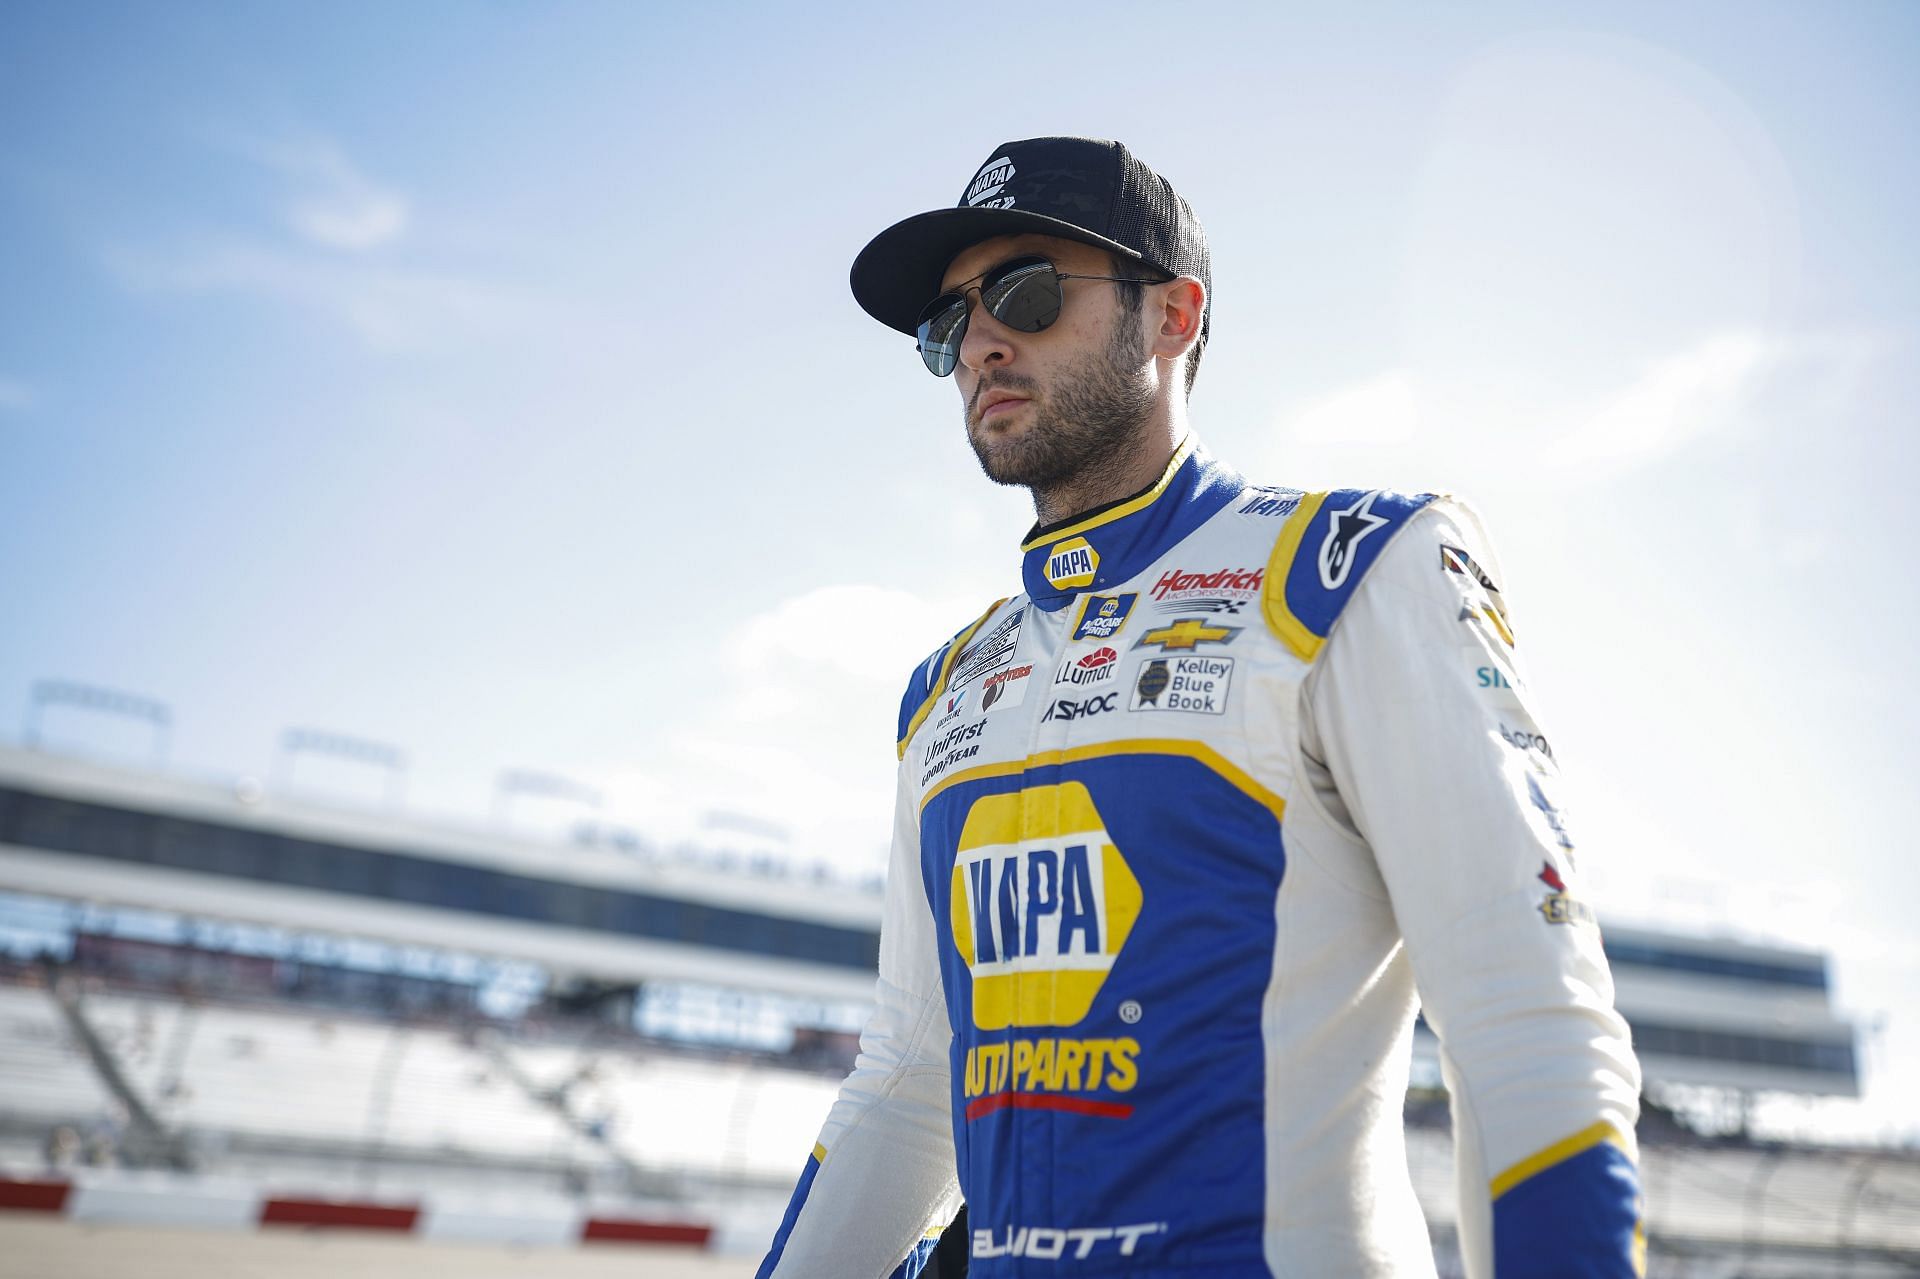 Chase Elliott walks the grid during practice for the 2022 NASCAR Cup Series Federated Auto Parts 400 at Richmond Raceway in Richmond, Virginia. (Photo by Jared C. Tilton/Getty Images)